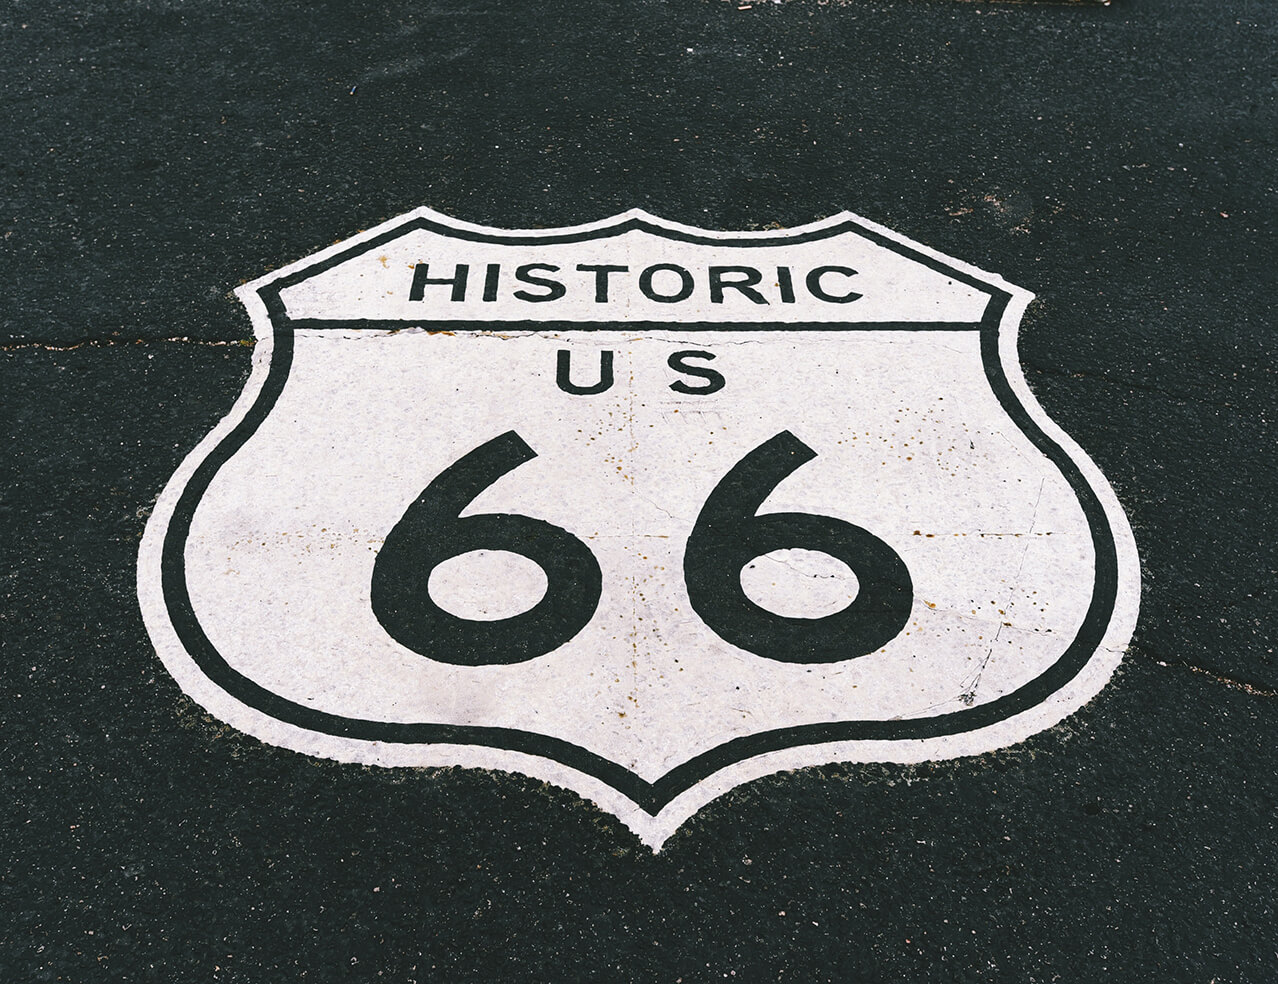 Historic Route 66 sign on the ground